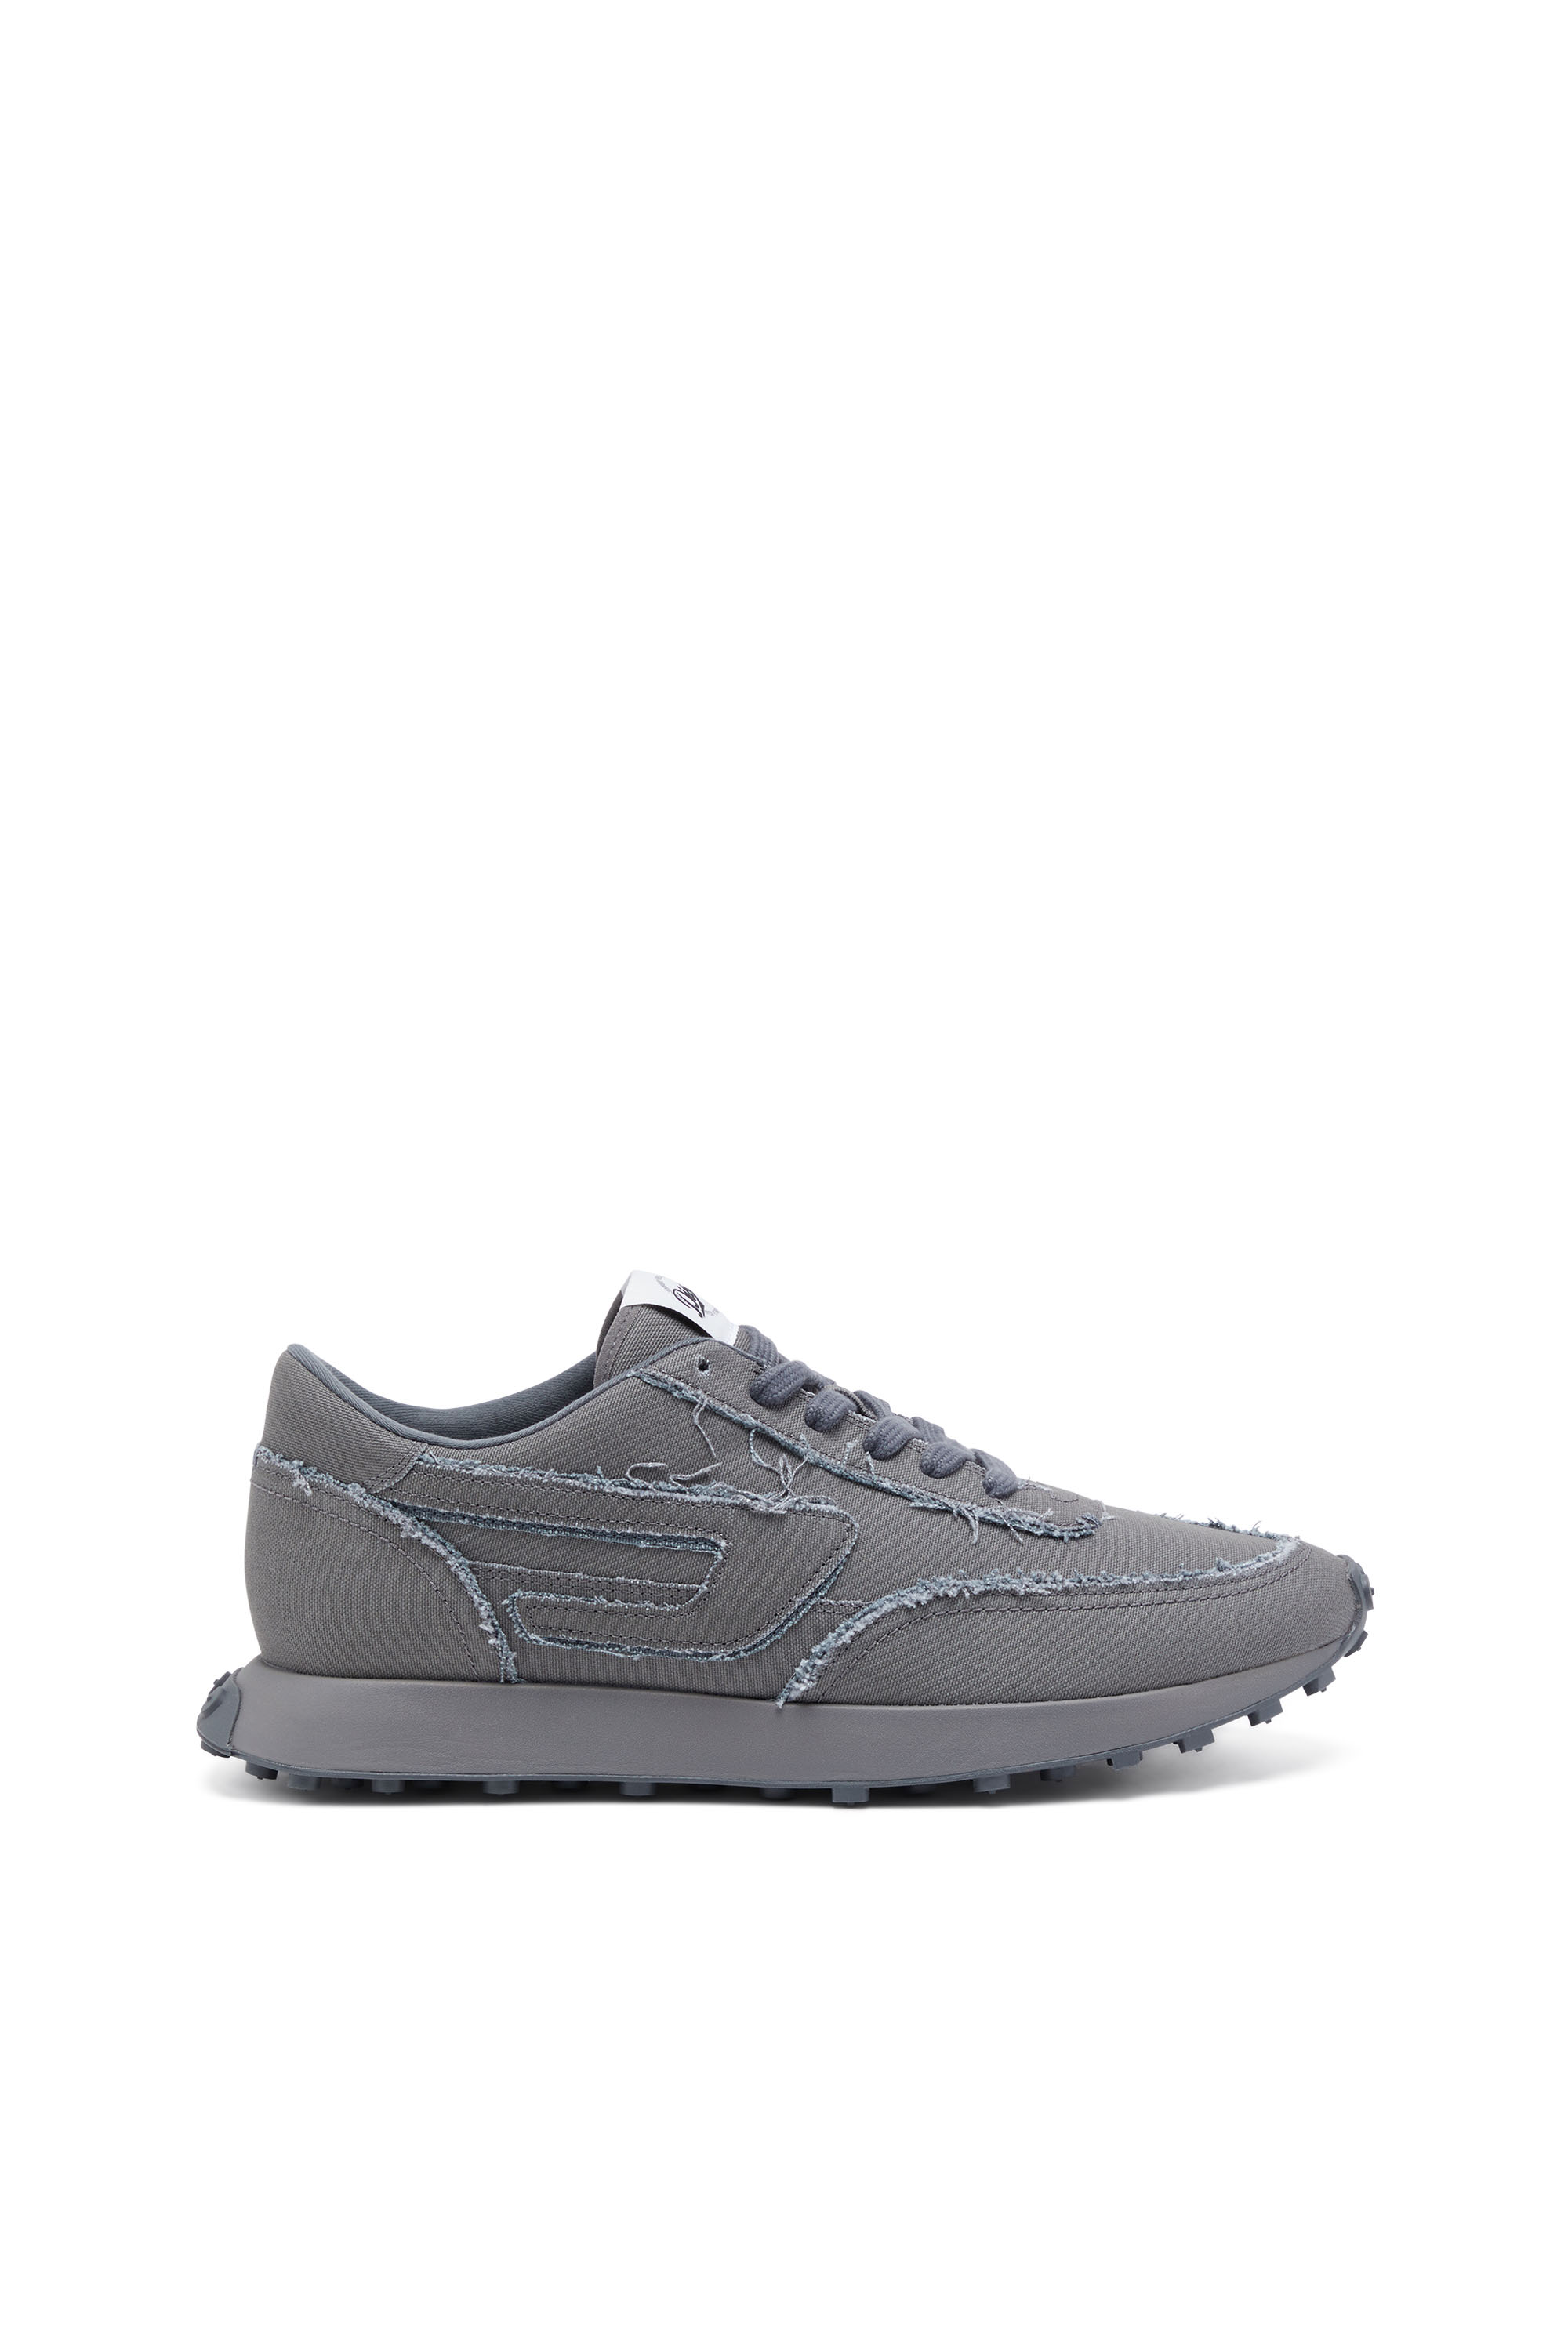 Diesel Canvas Sneakers With Frayed Edges In Grey